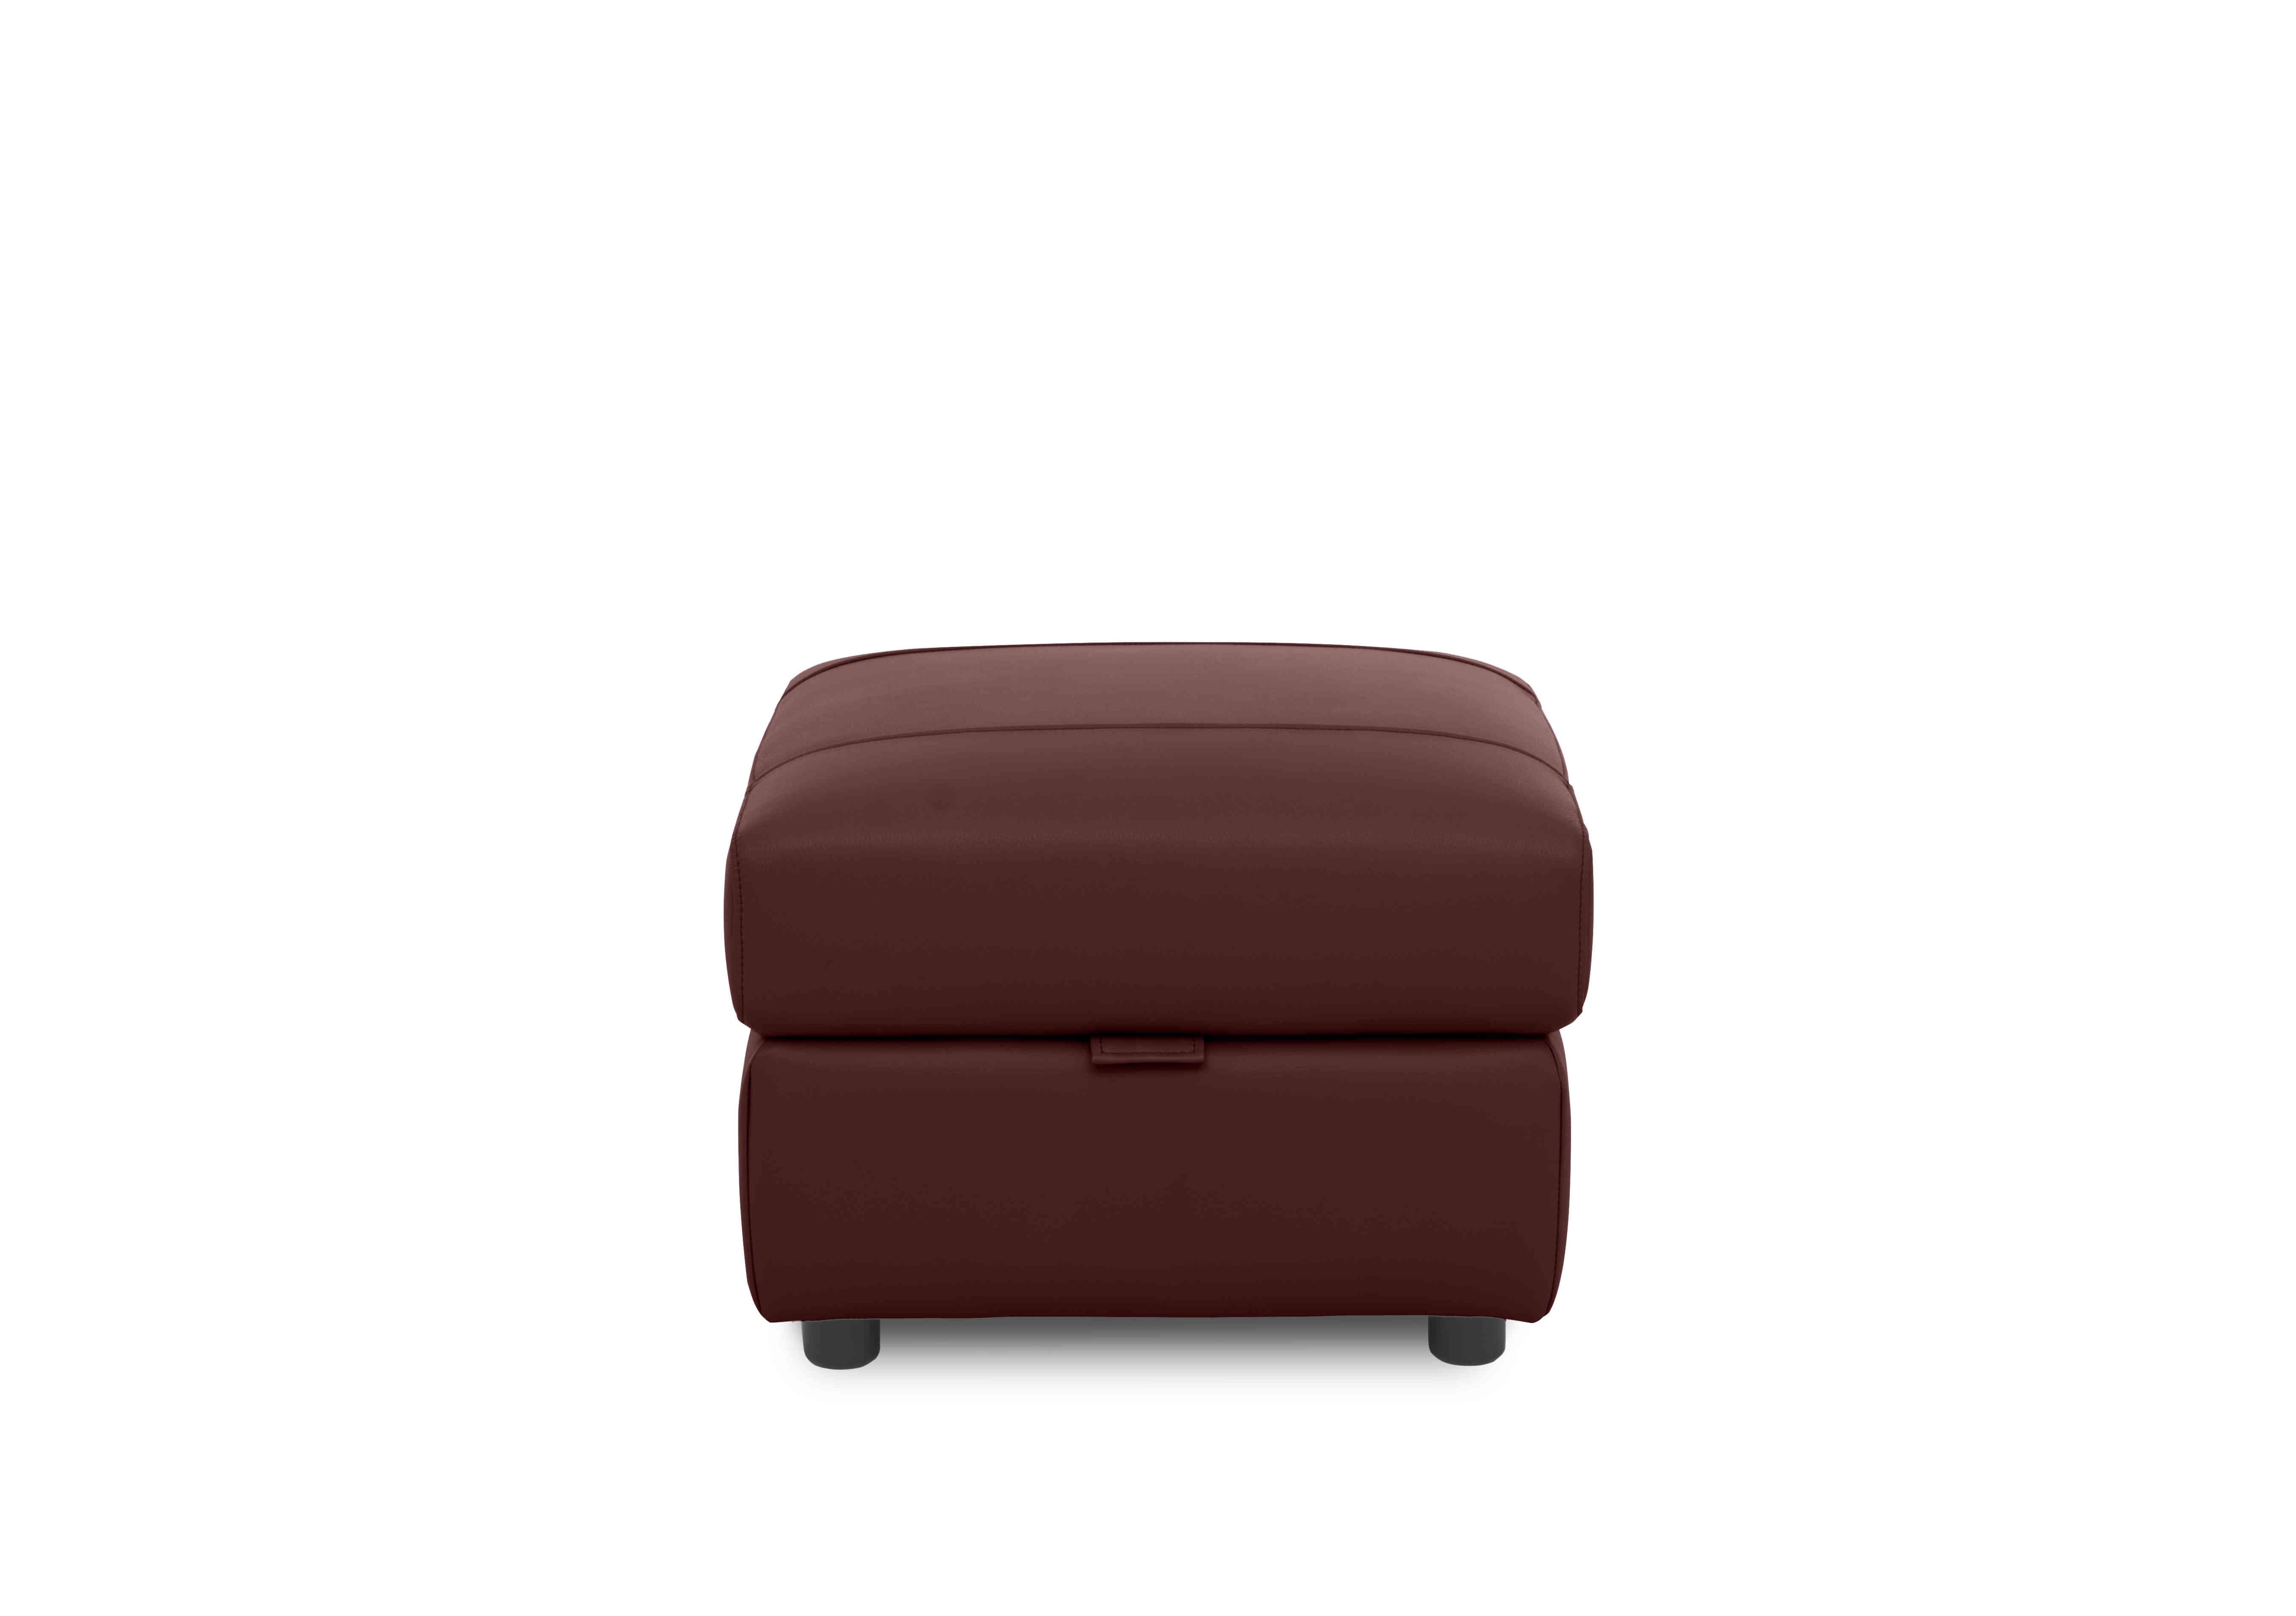 Sloane Leather Storage Footstool in Cat-60/15 Ruby on Furniture Village